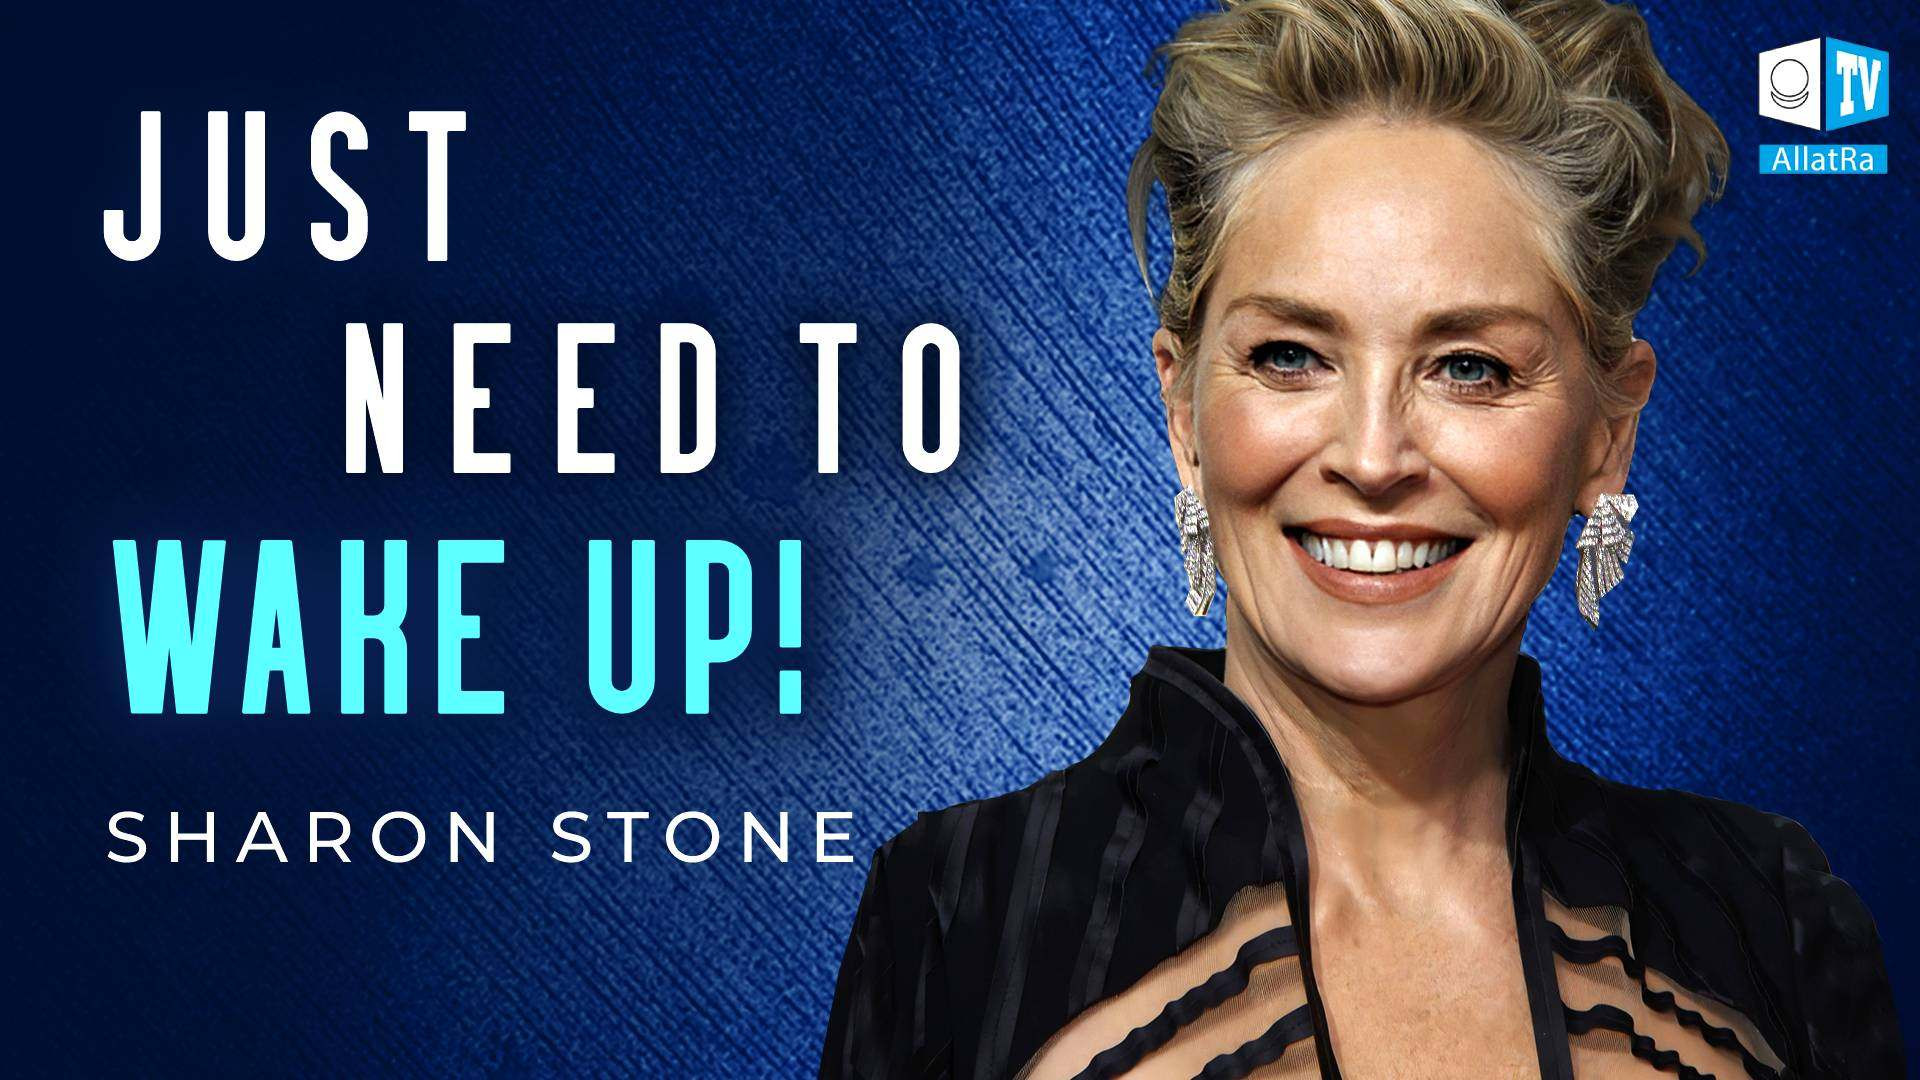 Sharon Stone: "Only the Person Himself Can Change Everything" | Response to AllatRa TV